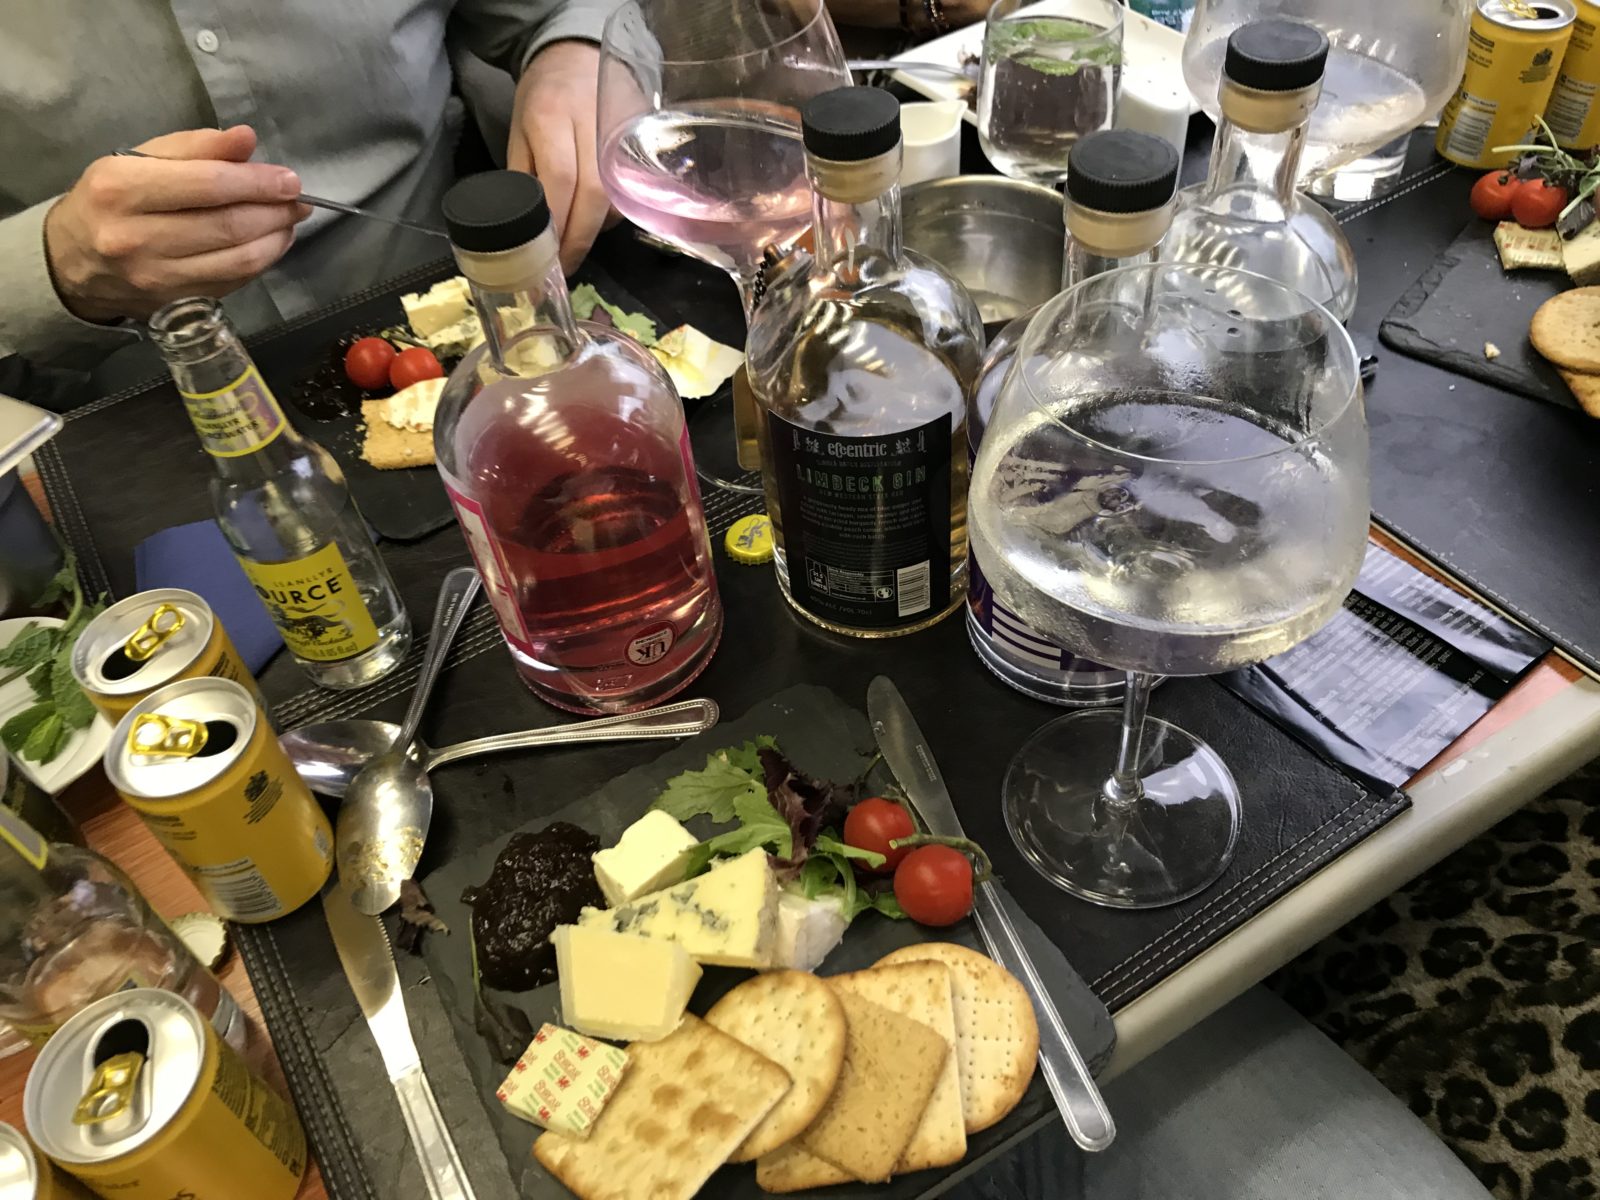 Welsh gin and cheese - Garald of Wales - Arriva Trains